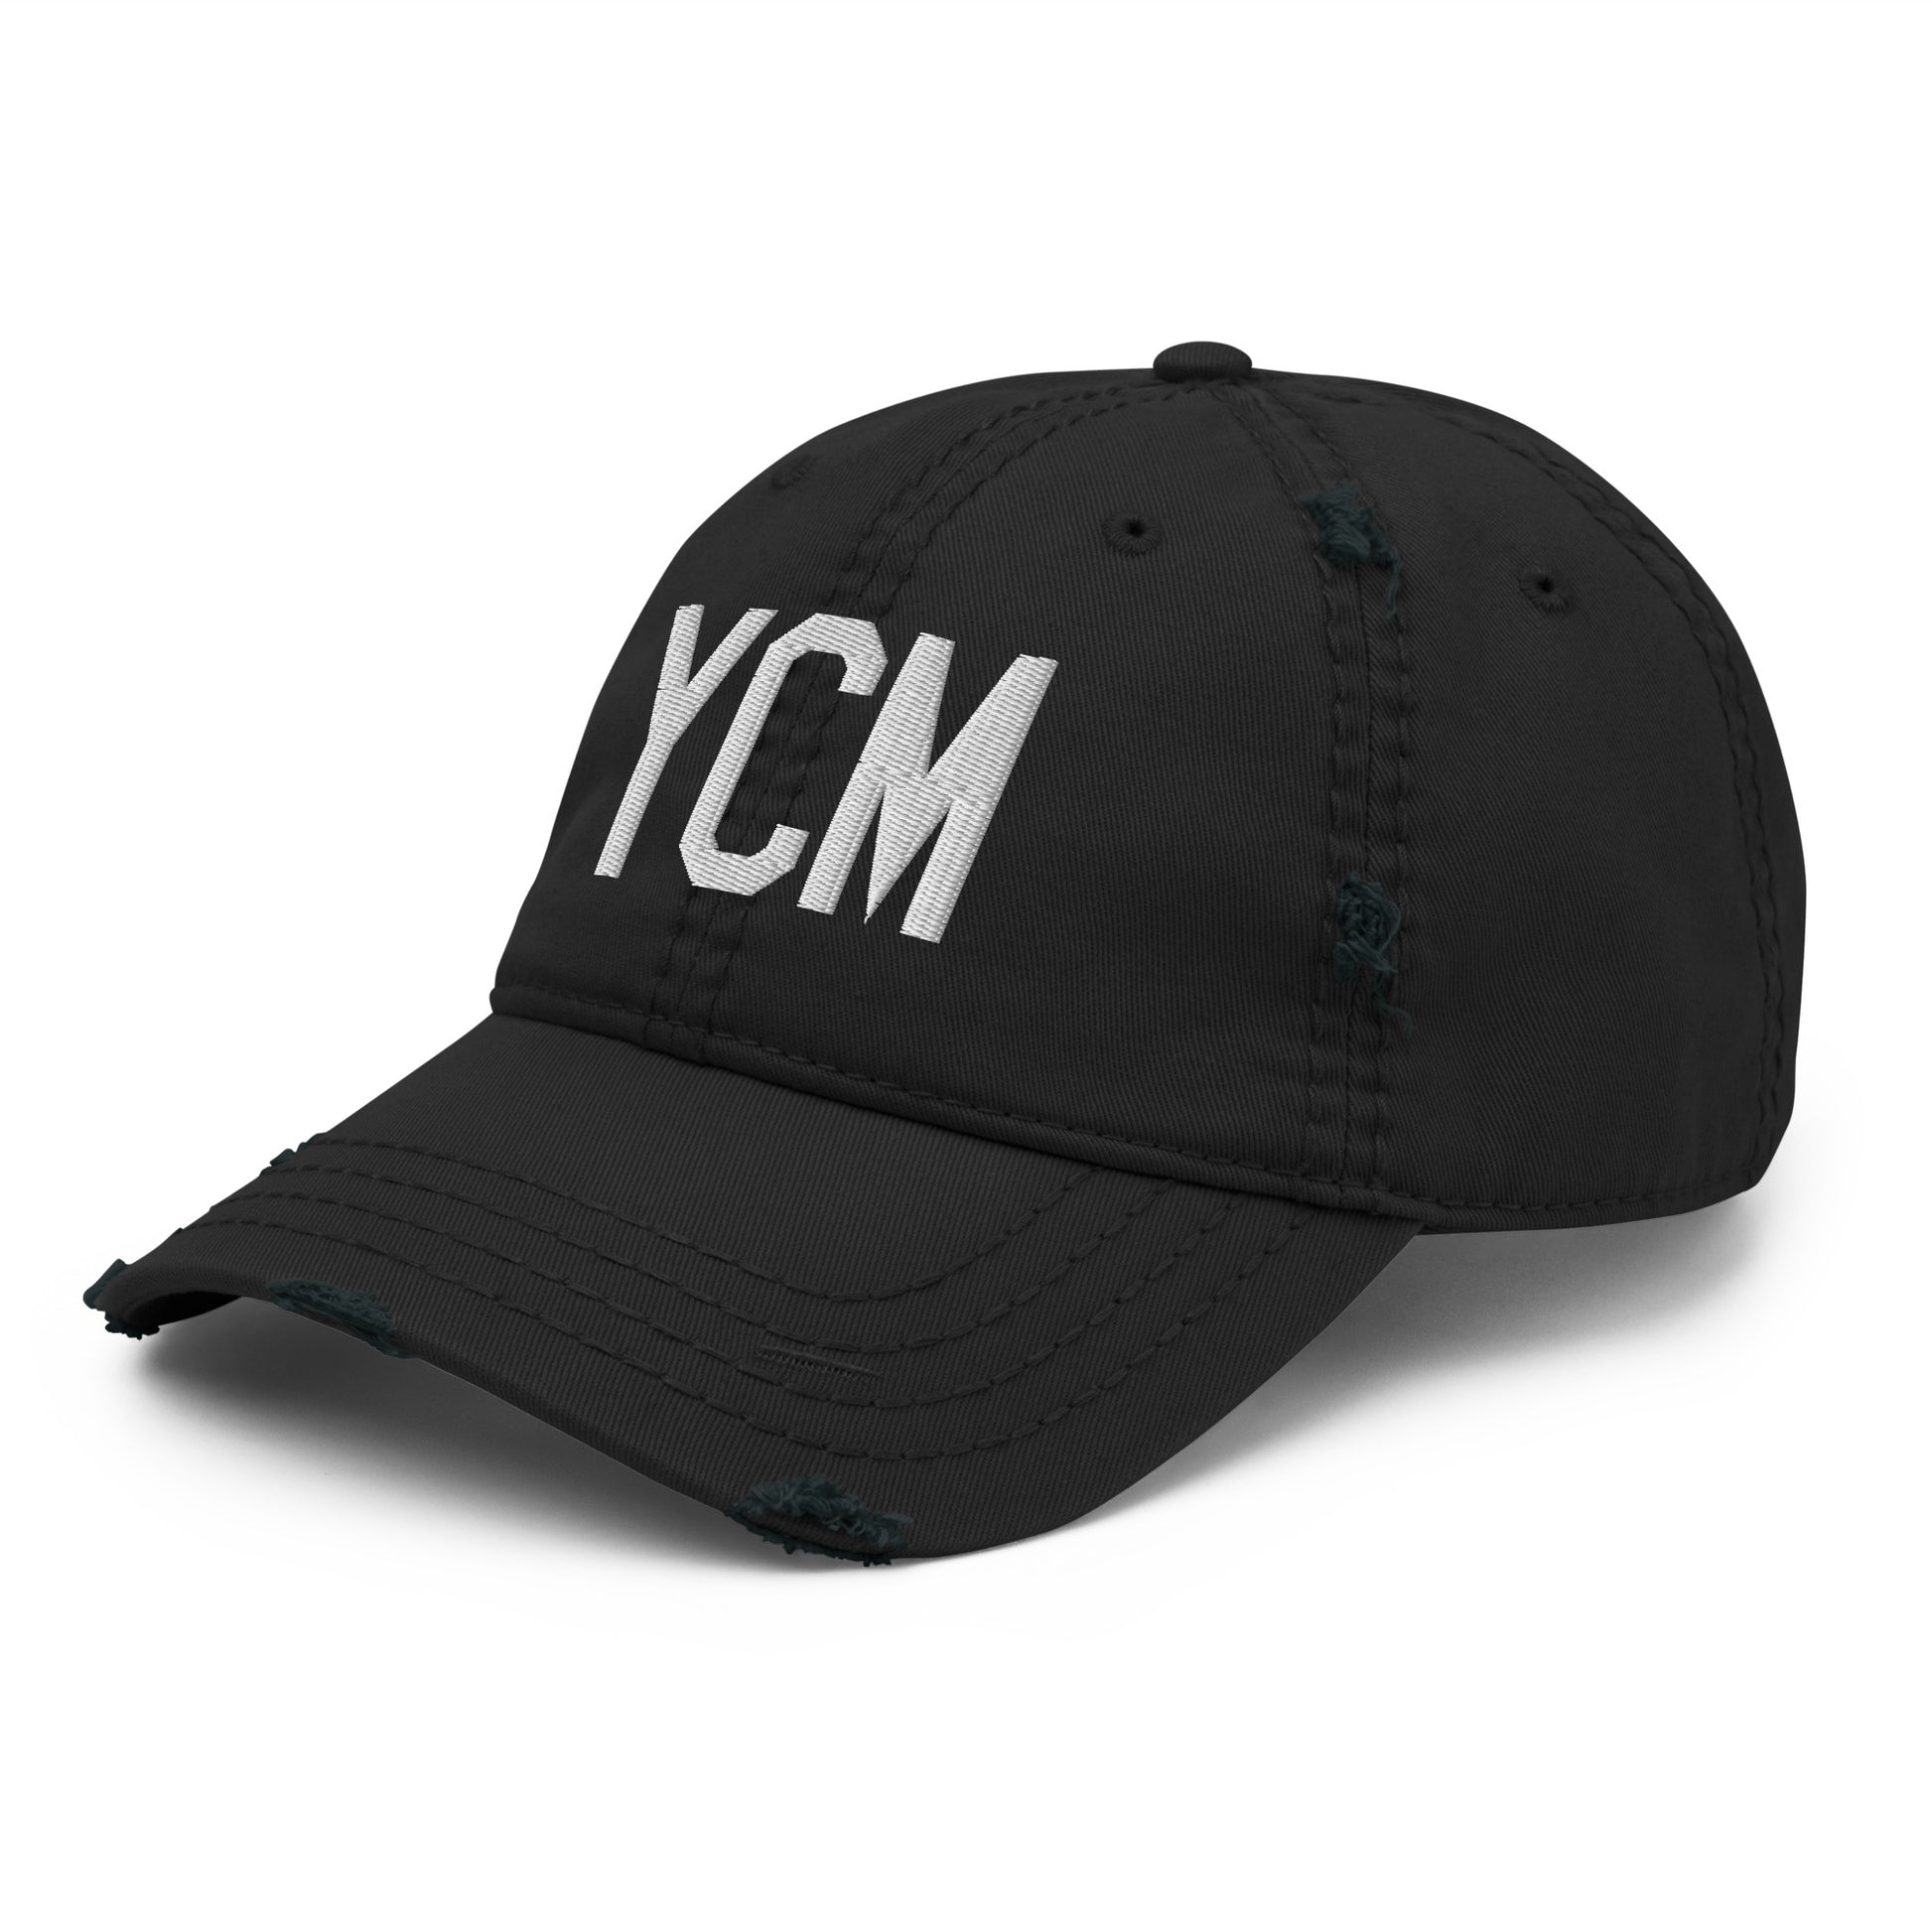 Airport Code Distressed Hat - White • YCM St. Catharines • YHM Designs - Image 11